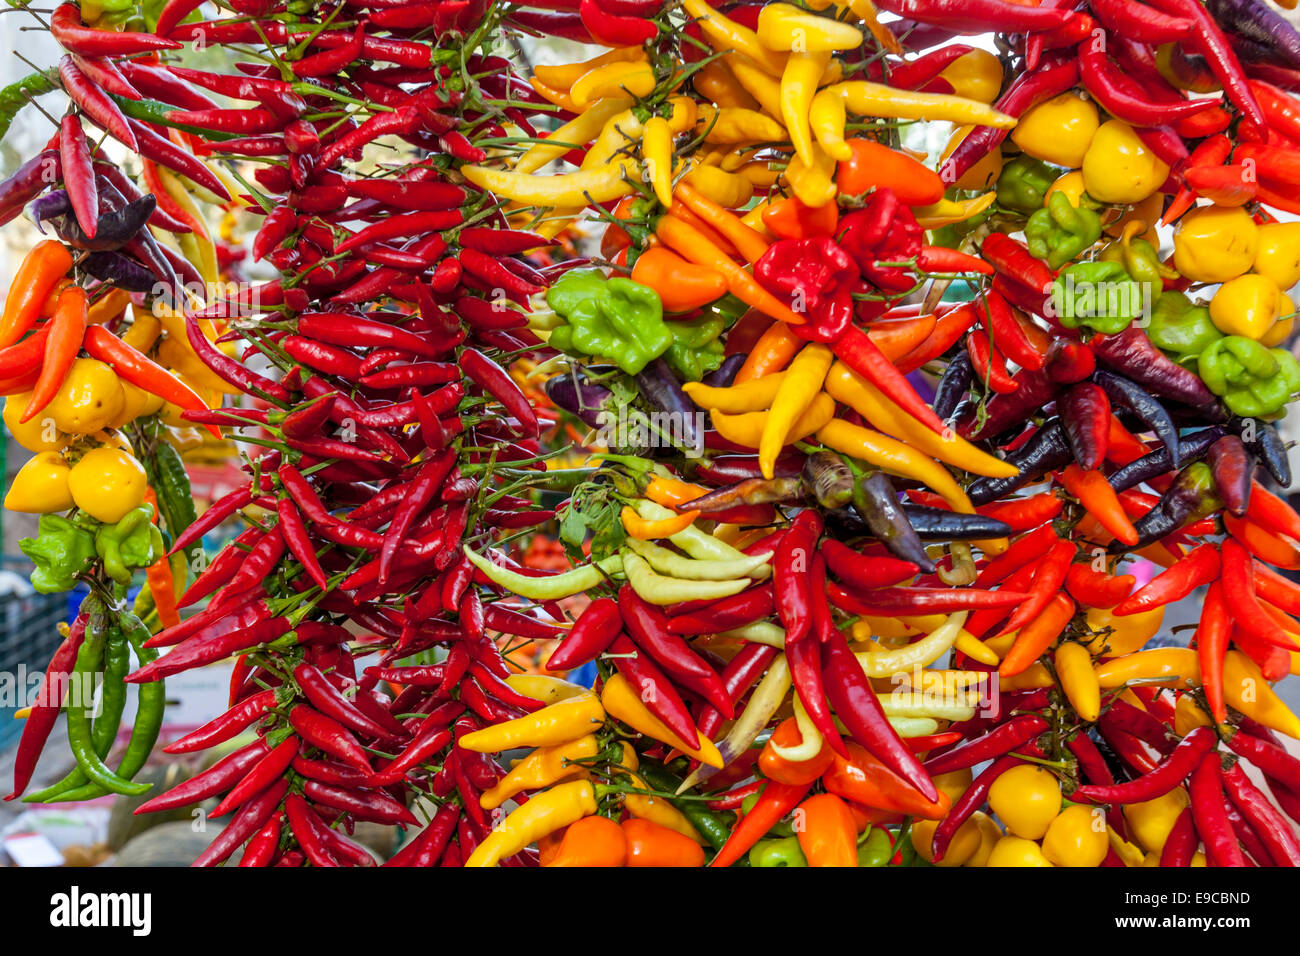 Colourful Chilis For Sale At The Thursday Market In Inca, Mallorca - Spain Stock Photo